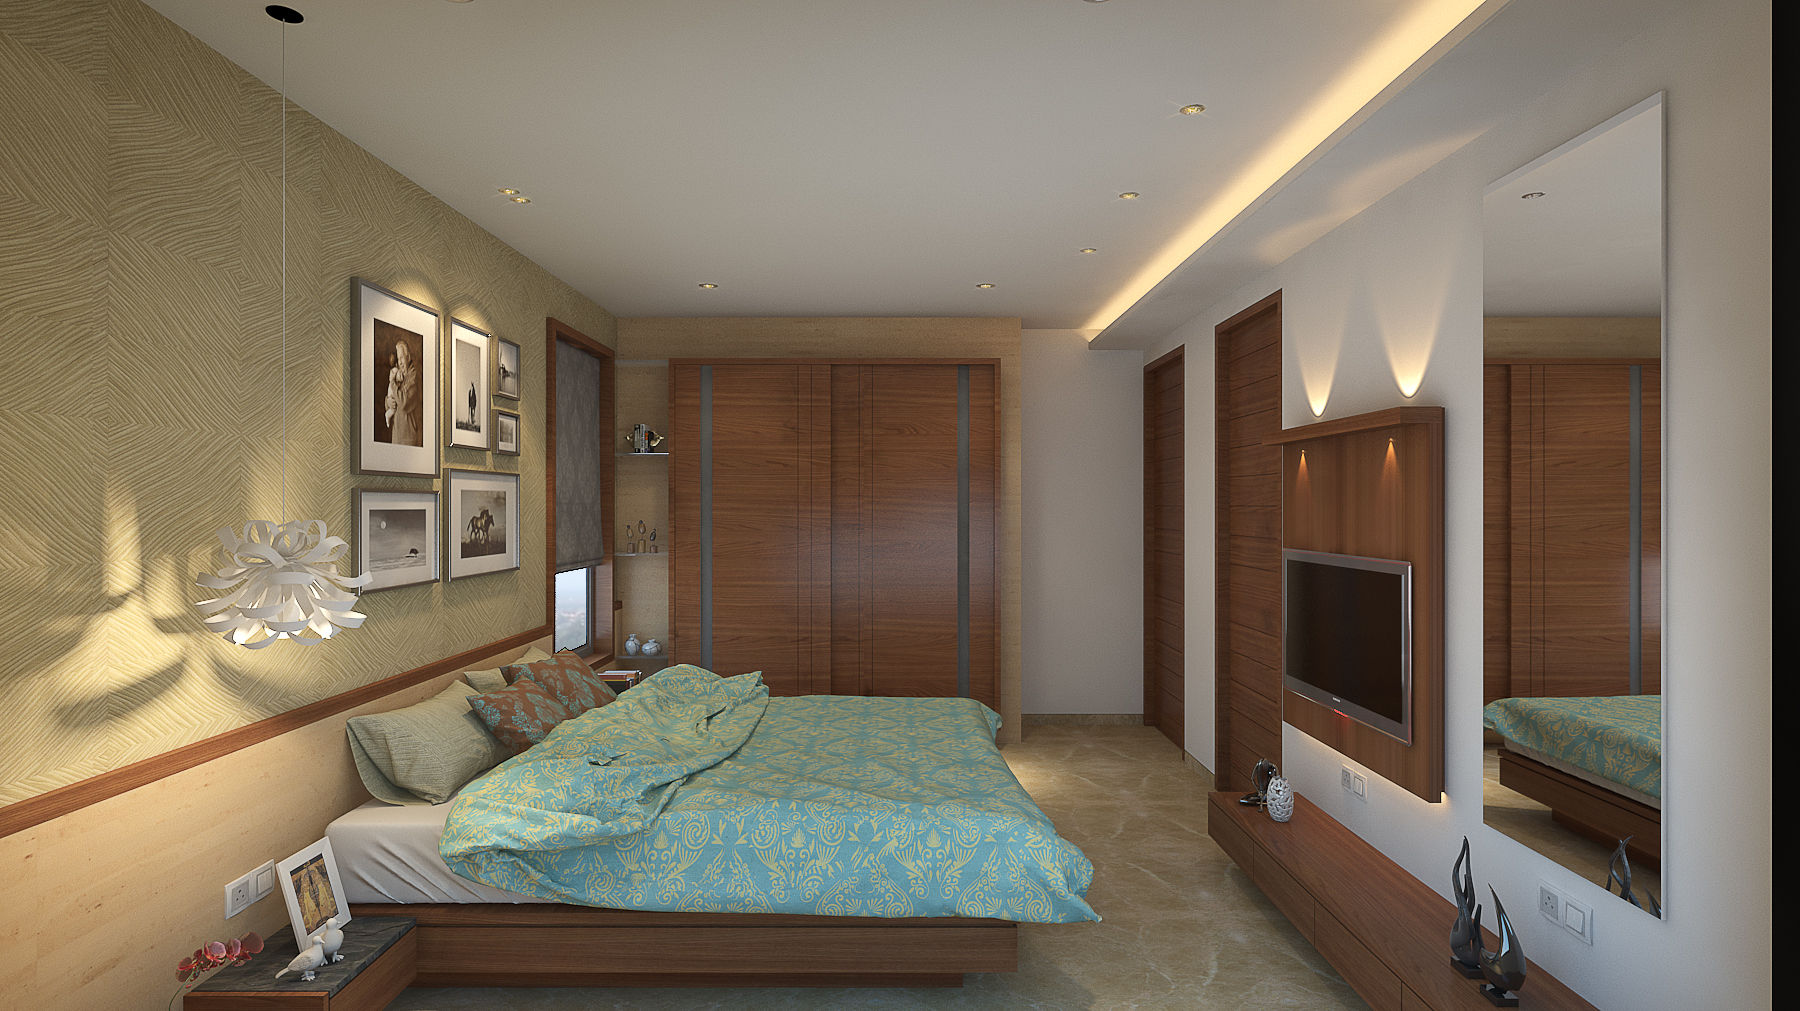 DR. BHAVESHBHAI CHUAHAN RESIDENCE, INCEPT DESIGN SERVICES INCEPT DESIGN SERVICES Modern style bedroom Property,Building,Comfort,Picture frame,Wood,Interior design,Lighting,Floor,Flooring,Wall